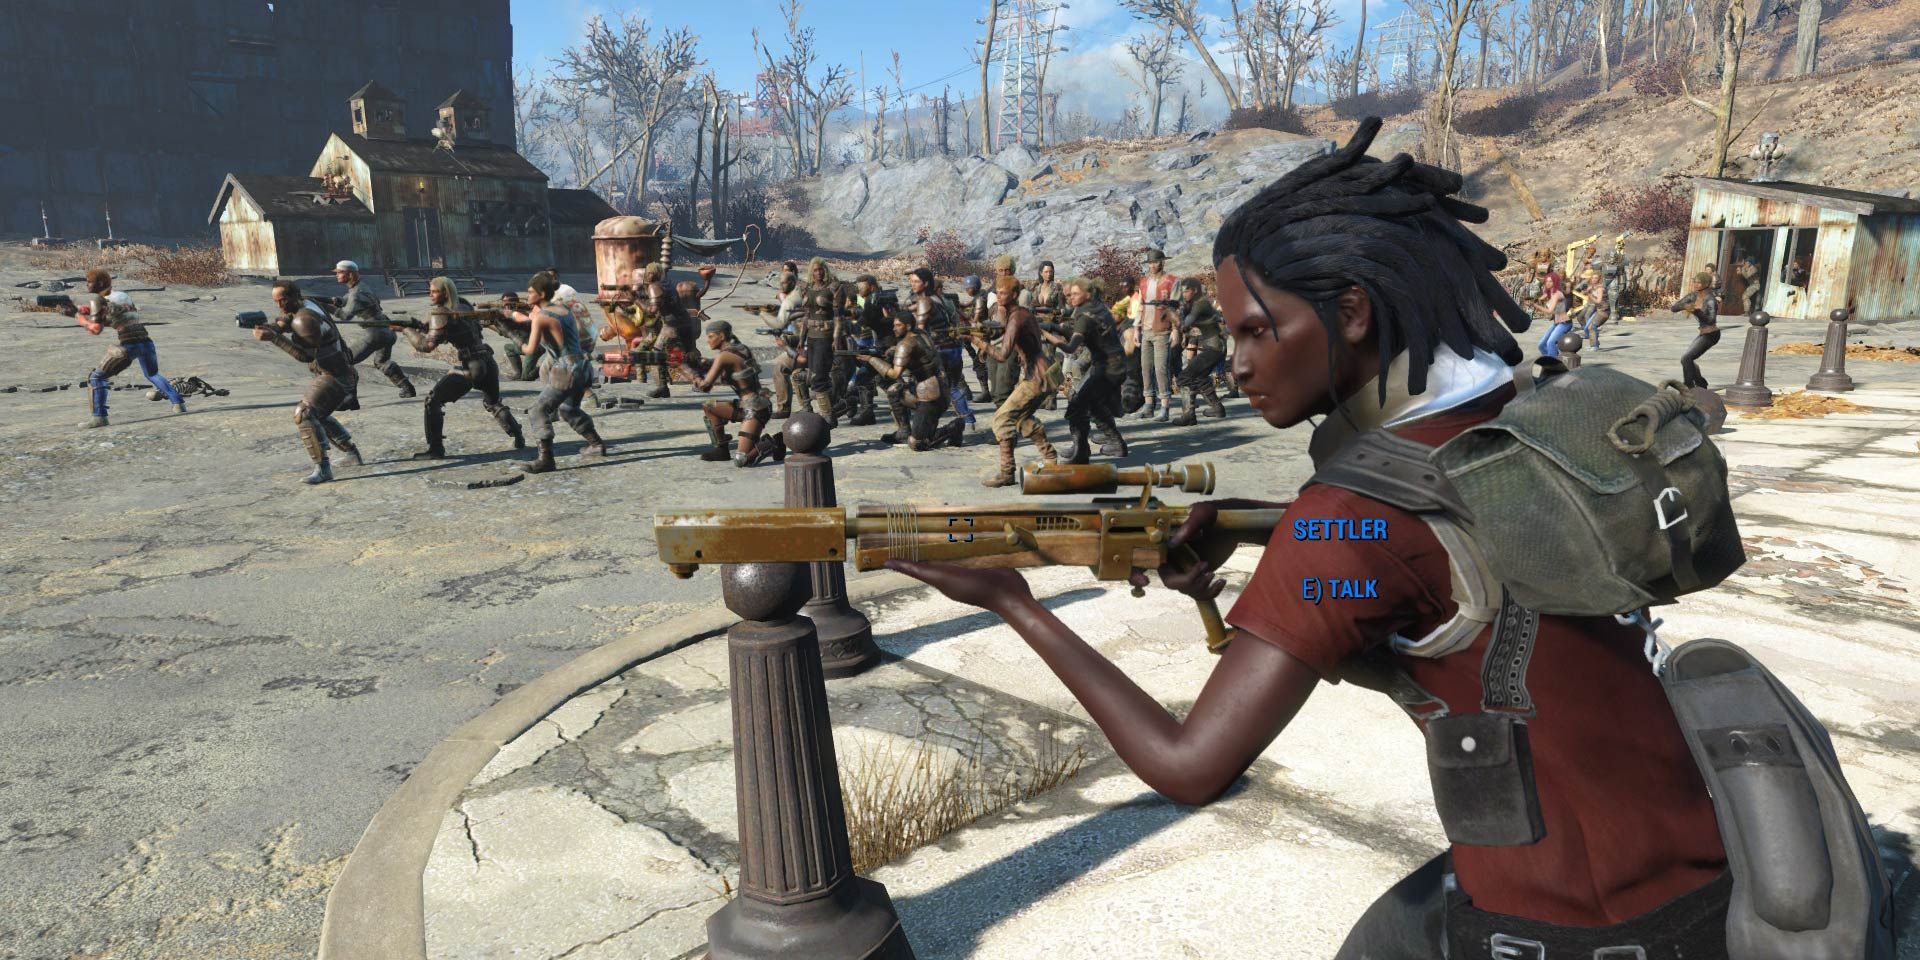 A unique settler in Fallout 4 shooting a gun in front of a horde of other settlers.